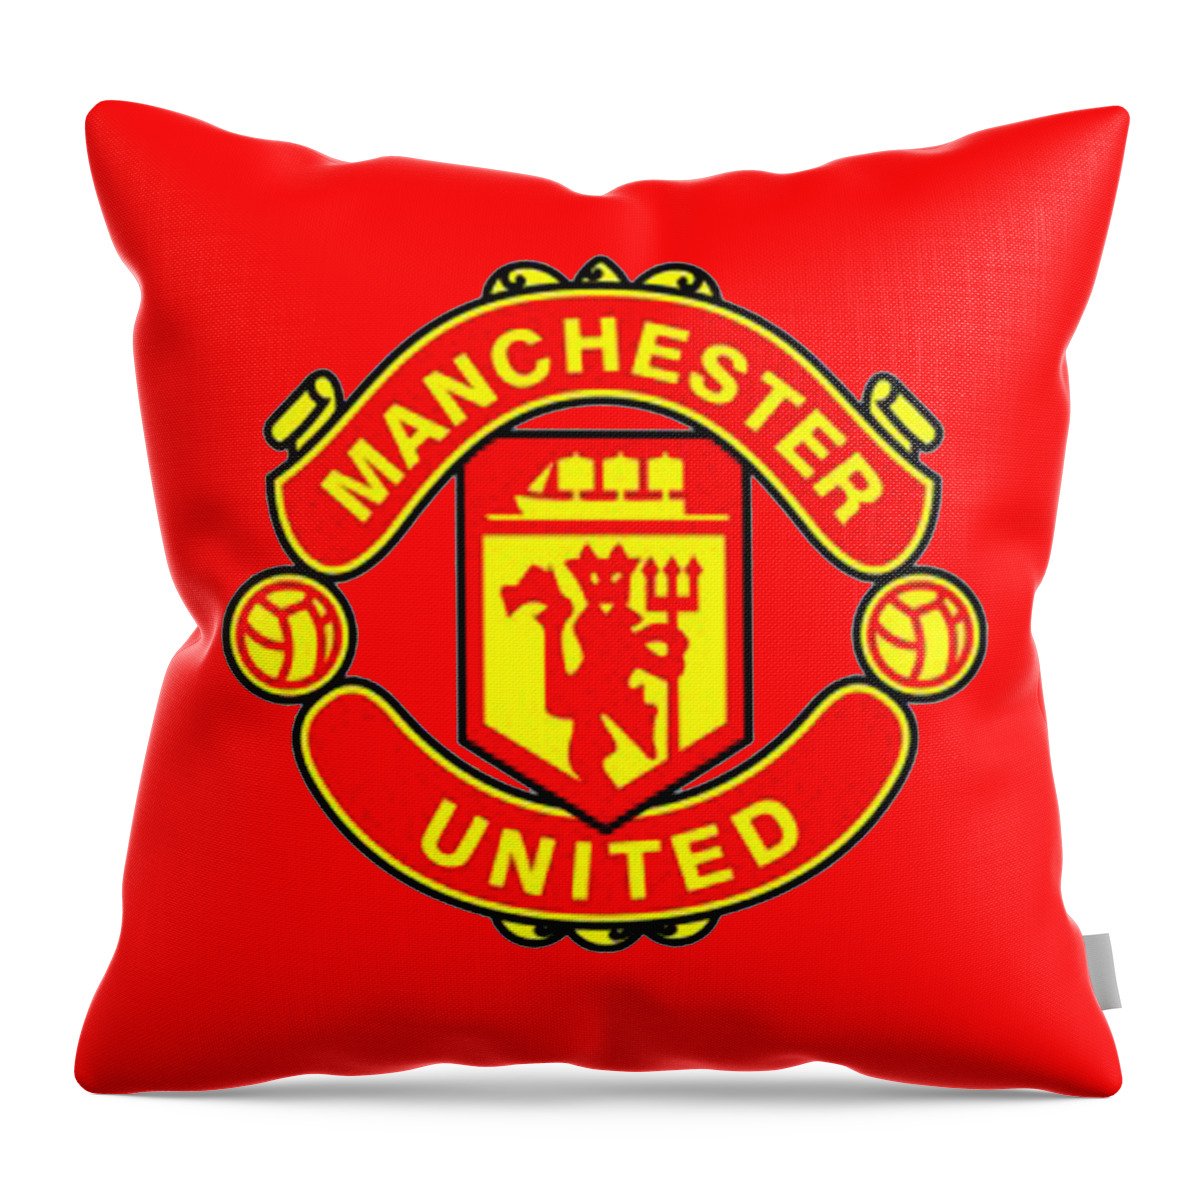 Manchester United Throw Pillow featuring the digital art Manchester United by Rawa Rontek